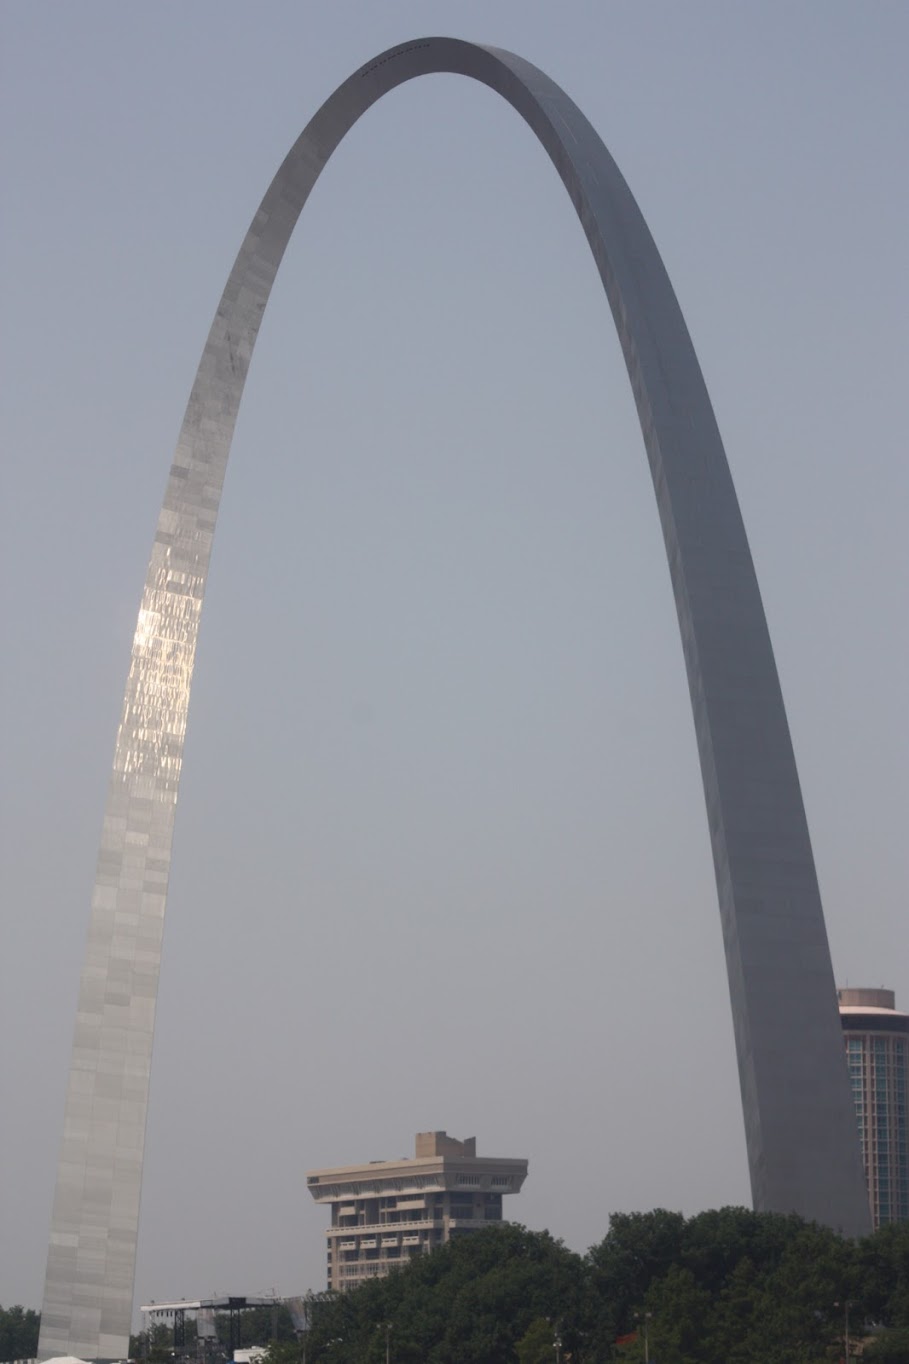 Carful of Kids: St. Louis Arch and the Mississippi River